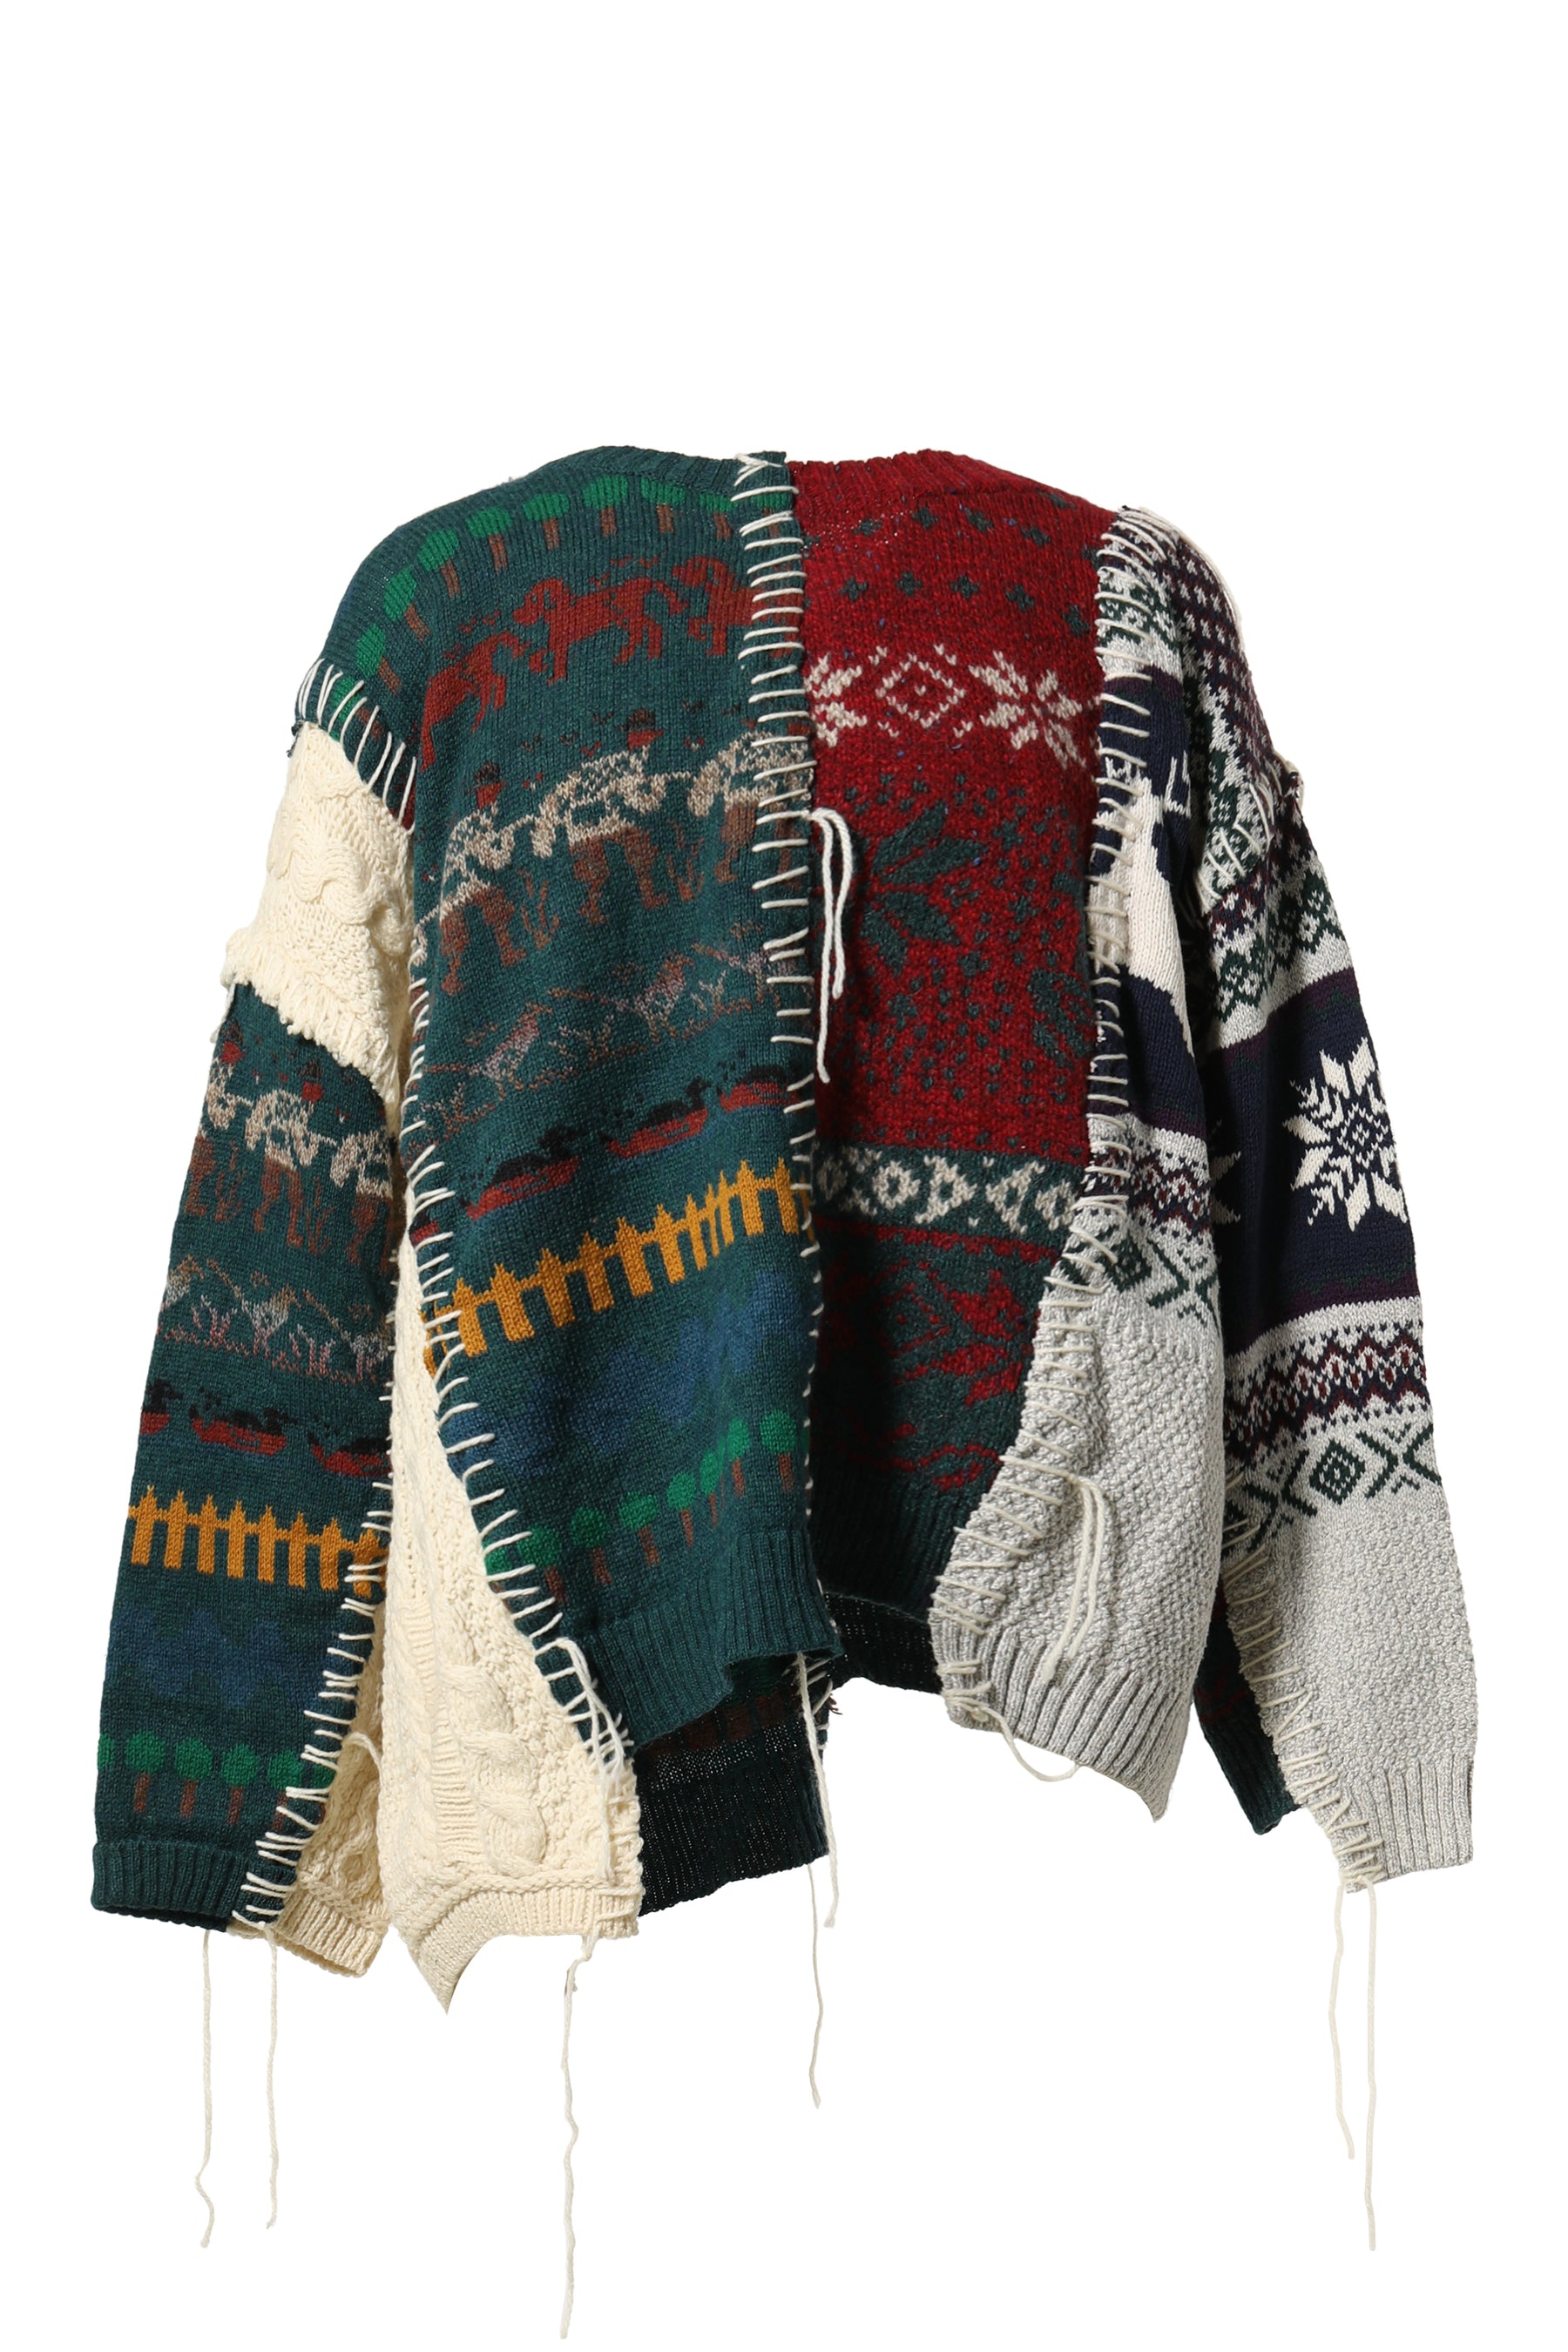 DISCOVERED ディスカバード FW22 NORDIC COLLAGE SWEATER / ASSORT ...